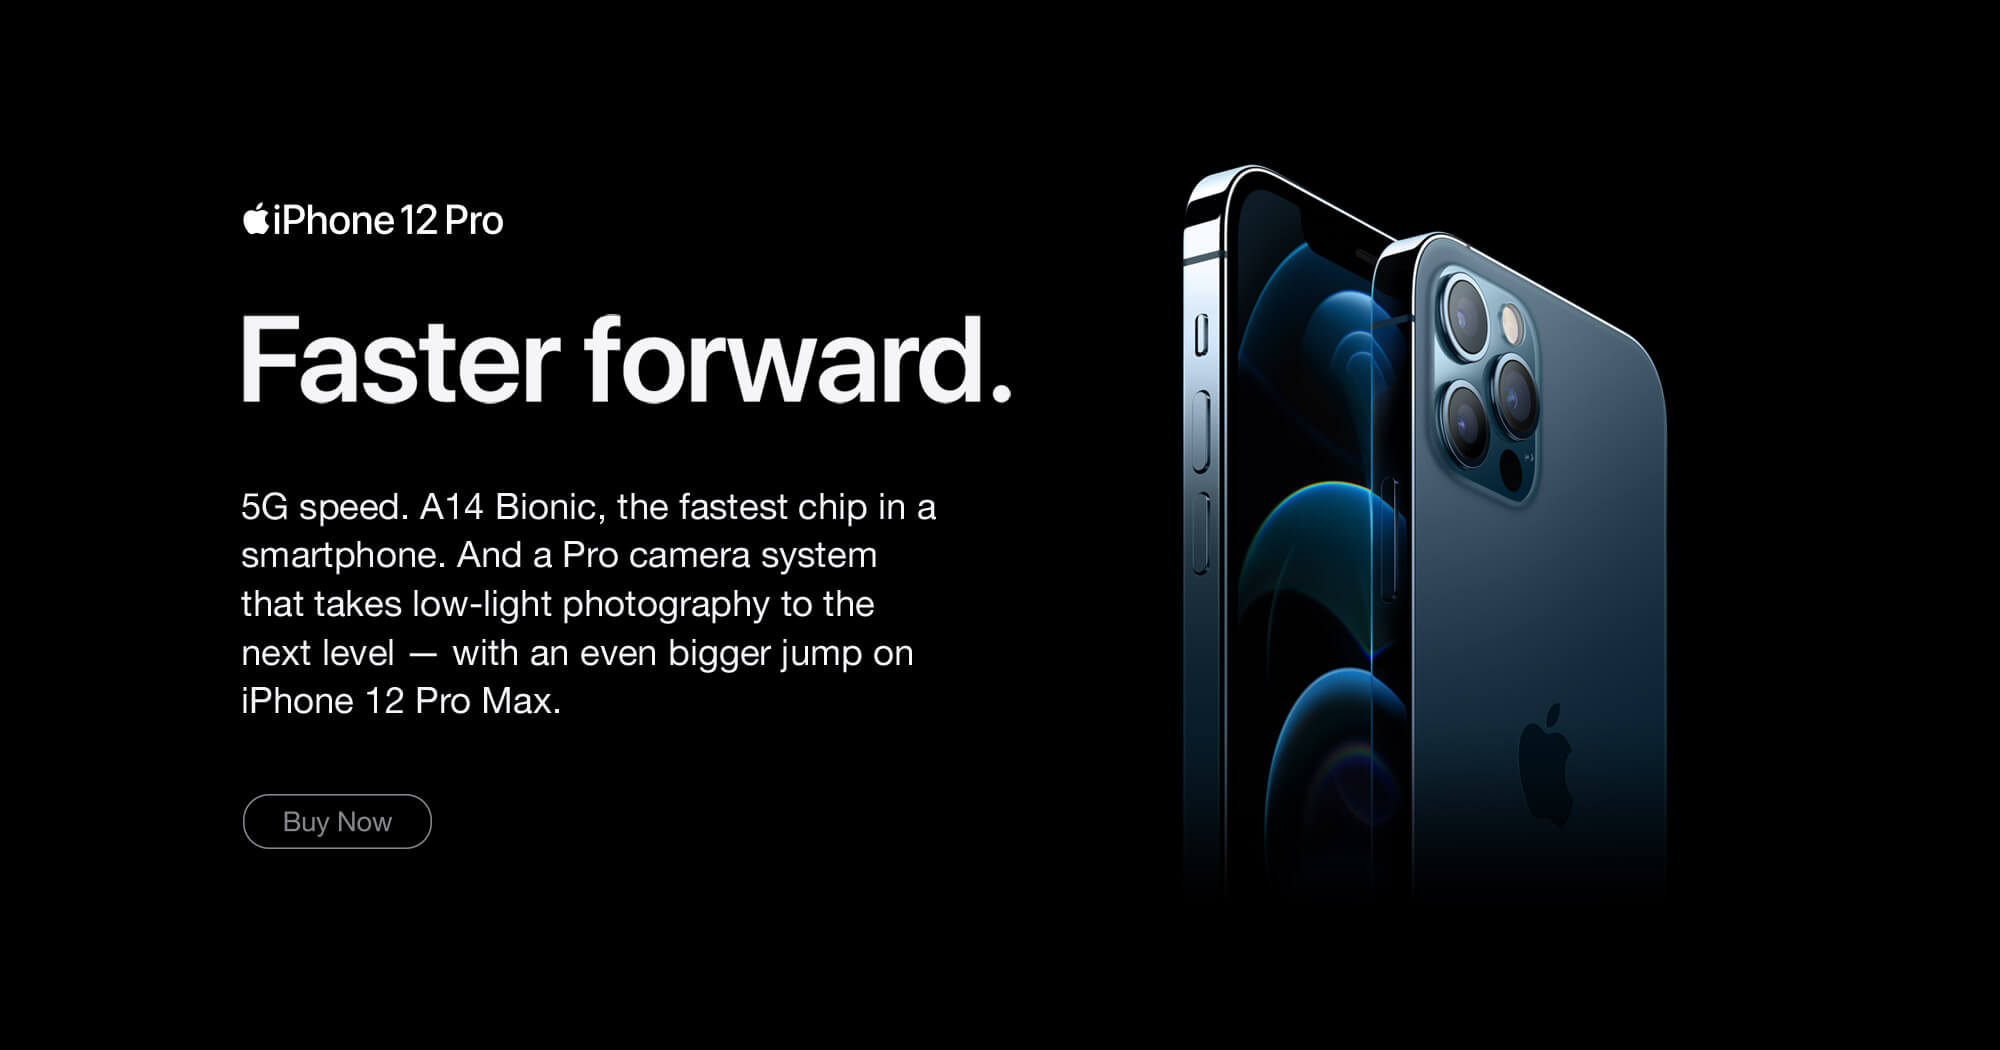 iPhone 12 Pro. Faster forward. Buy Now.